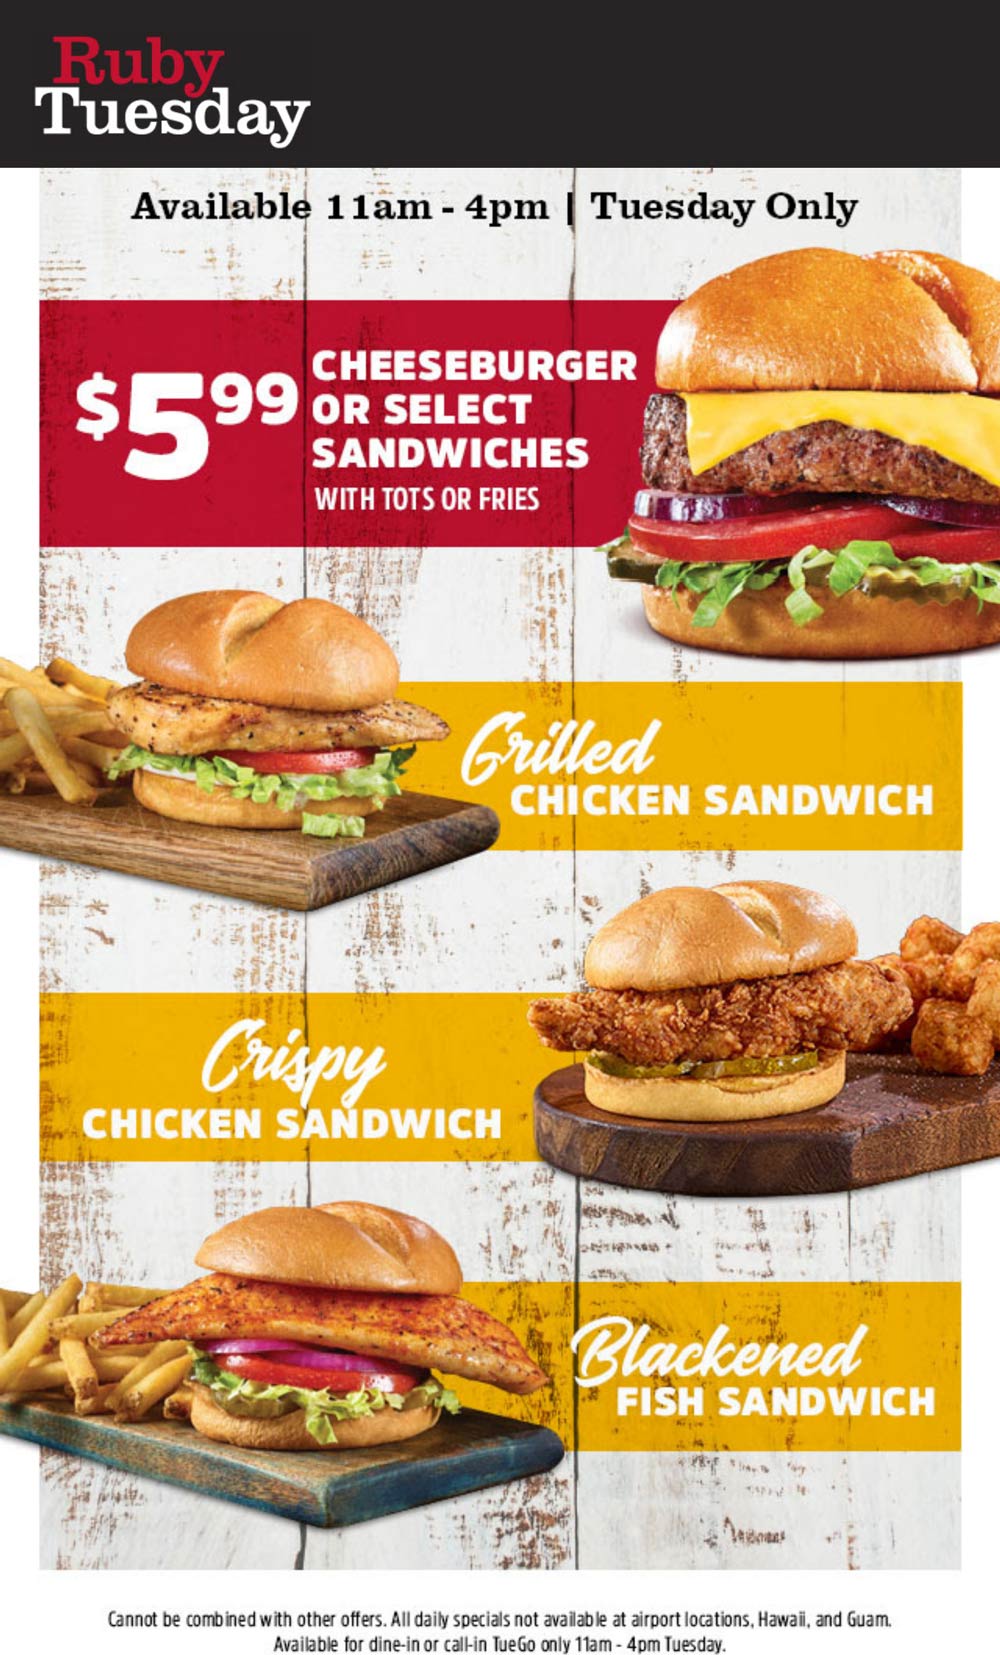 Ruby Tuesday restaurants Coupon  Cheeseburger or chicken sandwich + fries = $6 til 4pm today at Ruby Tuesday #rubytuesday 